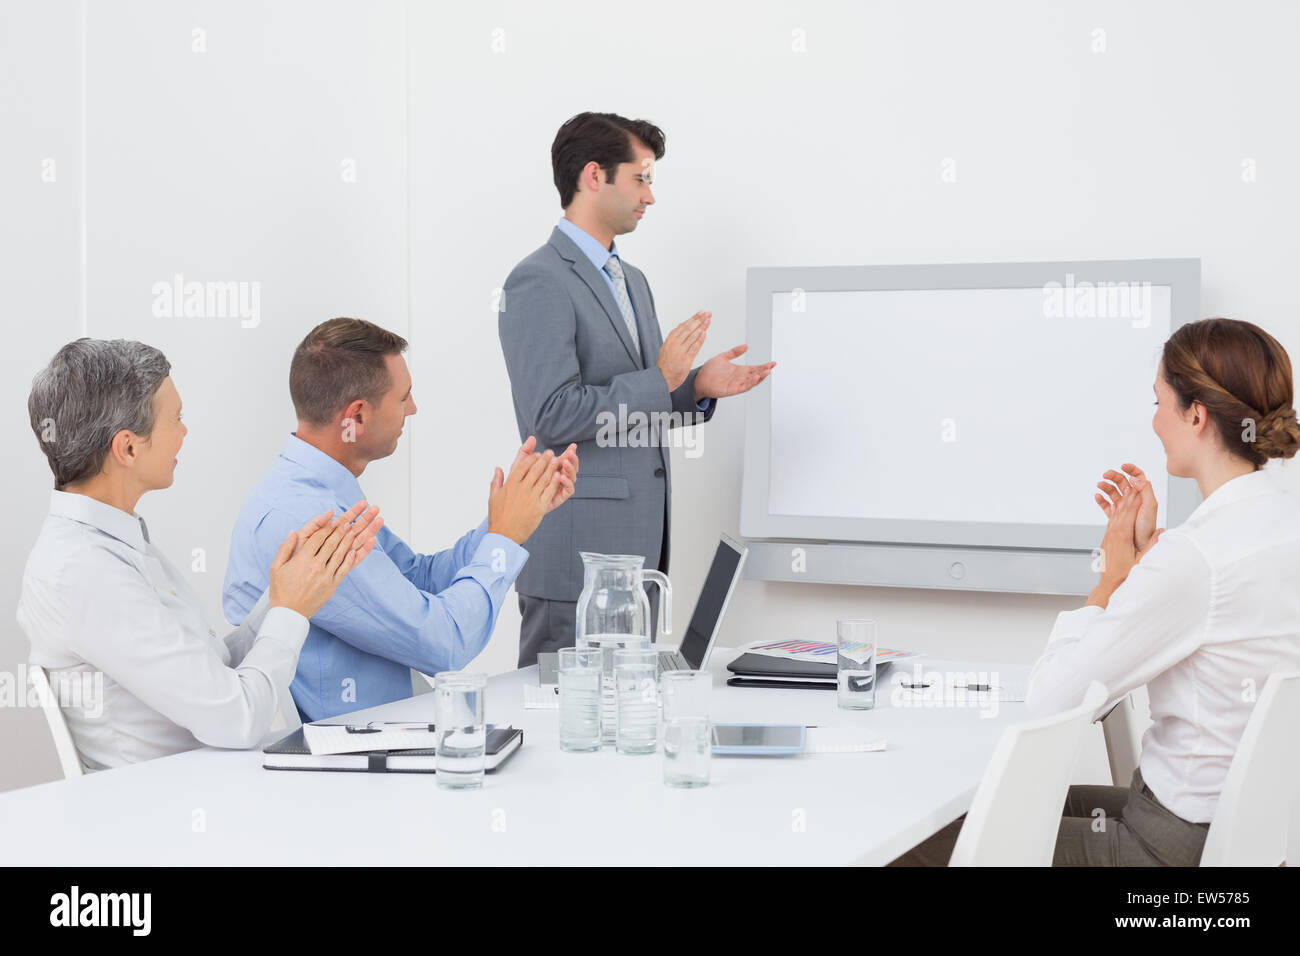 Business team applauding and looking at white screen Stock Photo